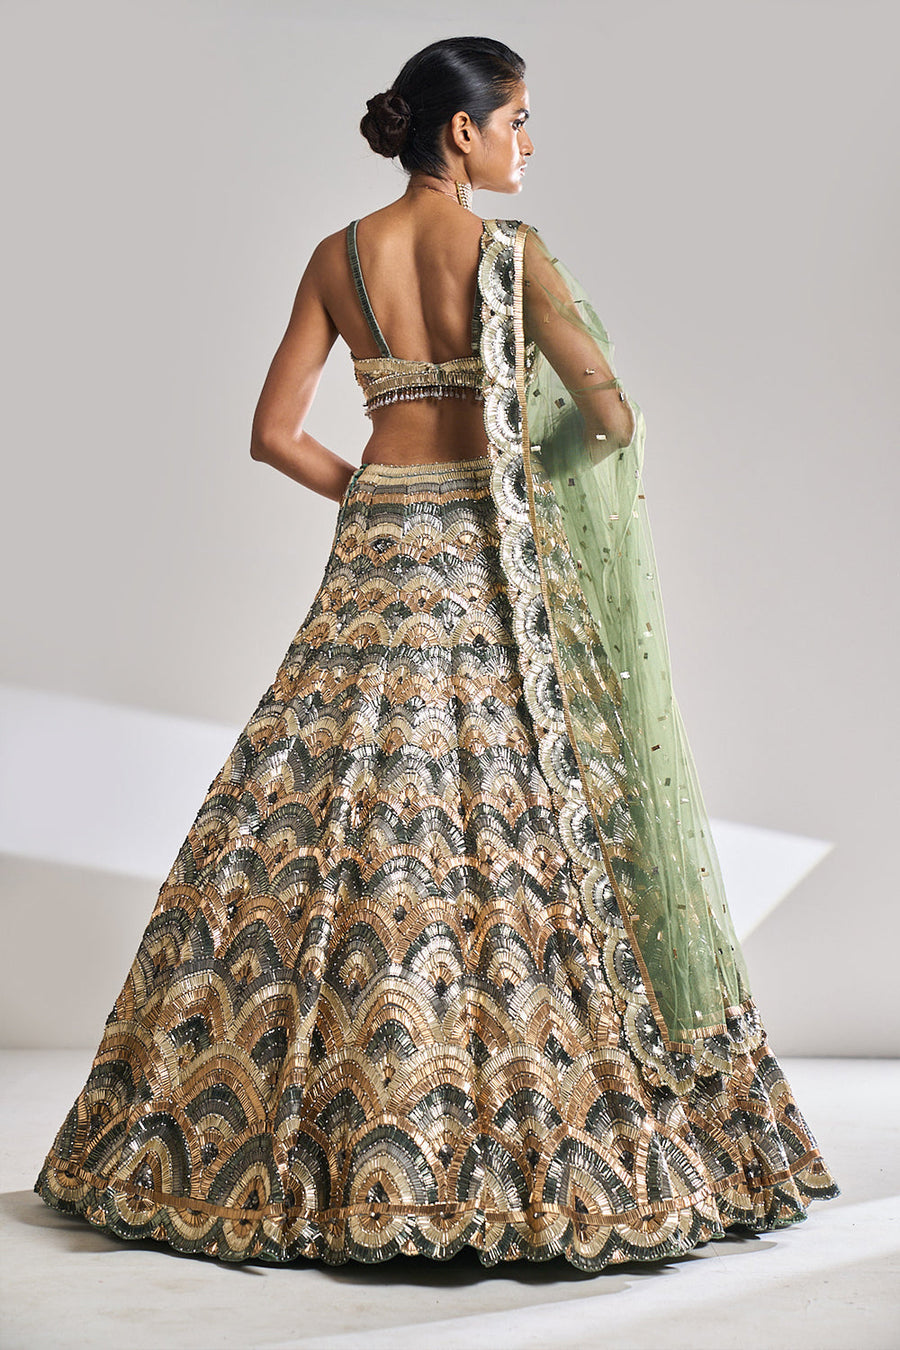 15 Crop Top Lehenga for Women to Create a Style Statement